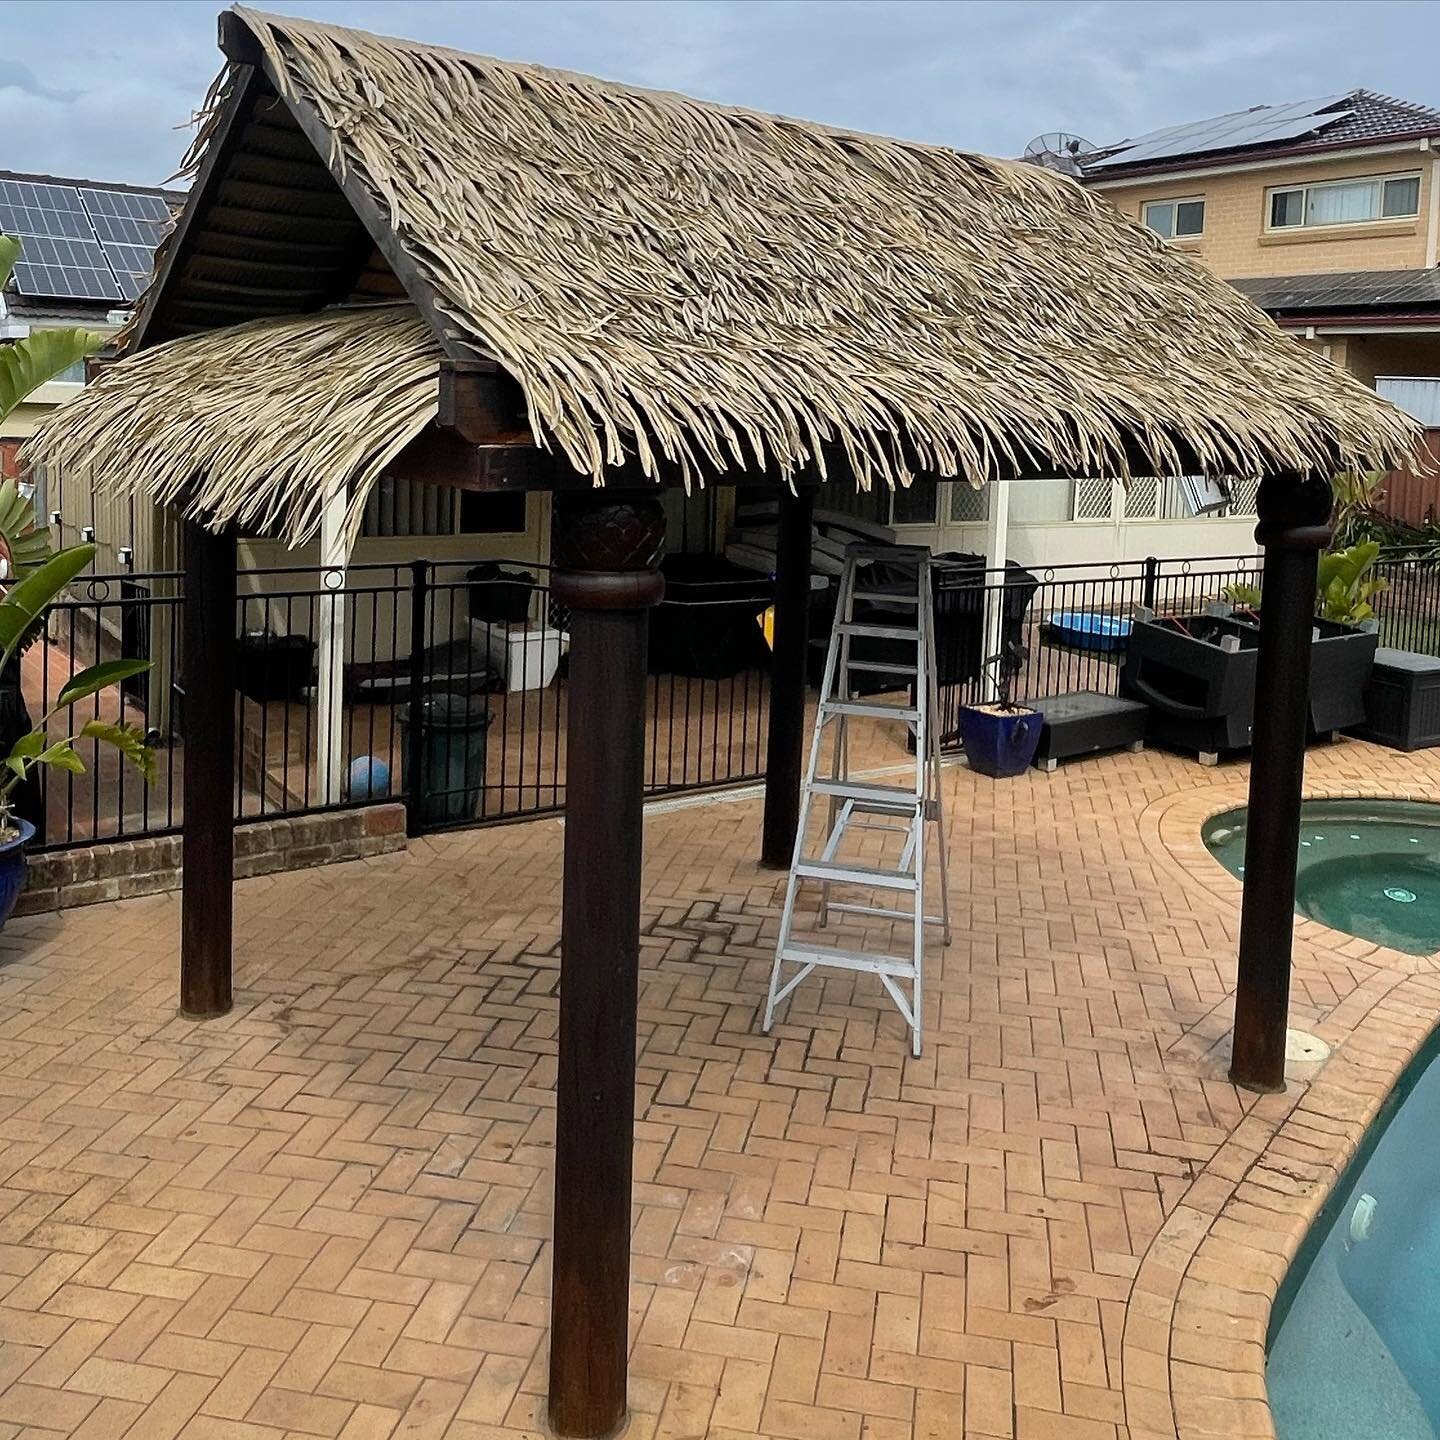 🏝 Re roof completed using our Palmex Artificial Thatching. 

* 50-year lifespan
* 20-year warranty
* Environmentally-friendly material
* No toxic product - No fumigation
* Recycled &amp; recyclable
* Zero-waste production
* Quick and easy installati